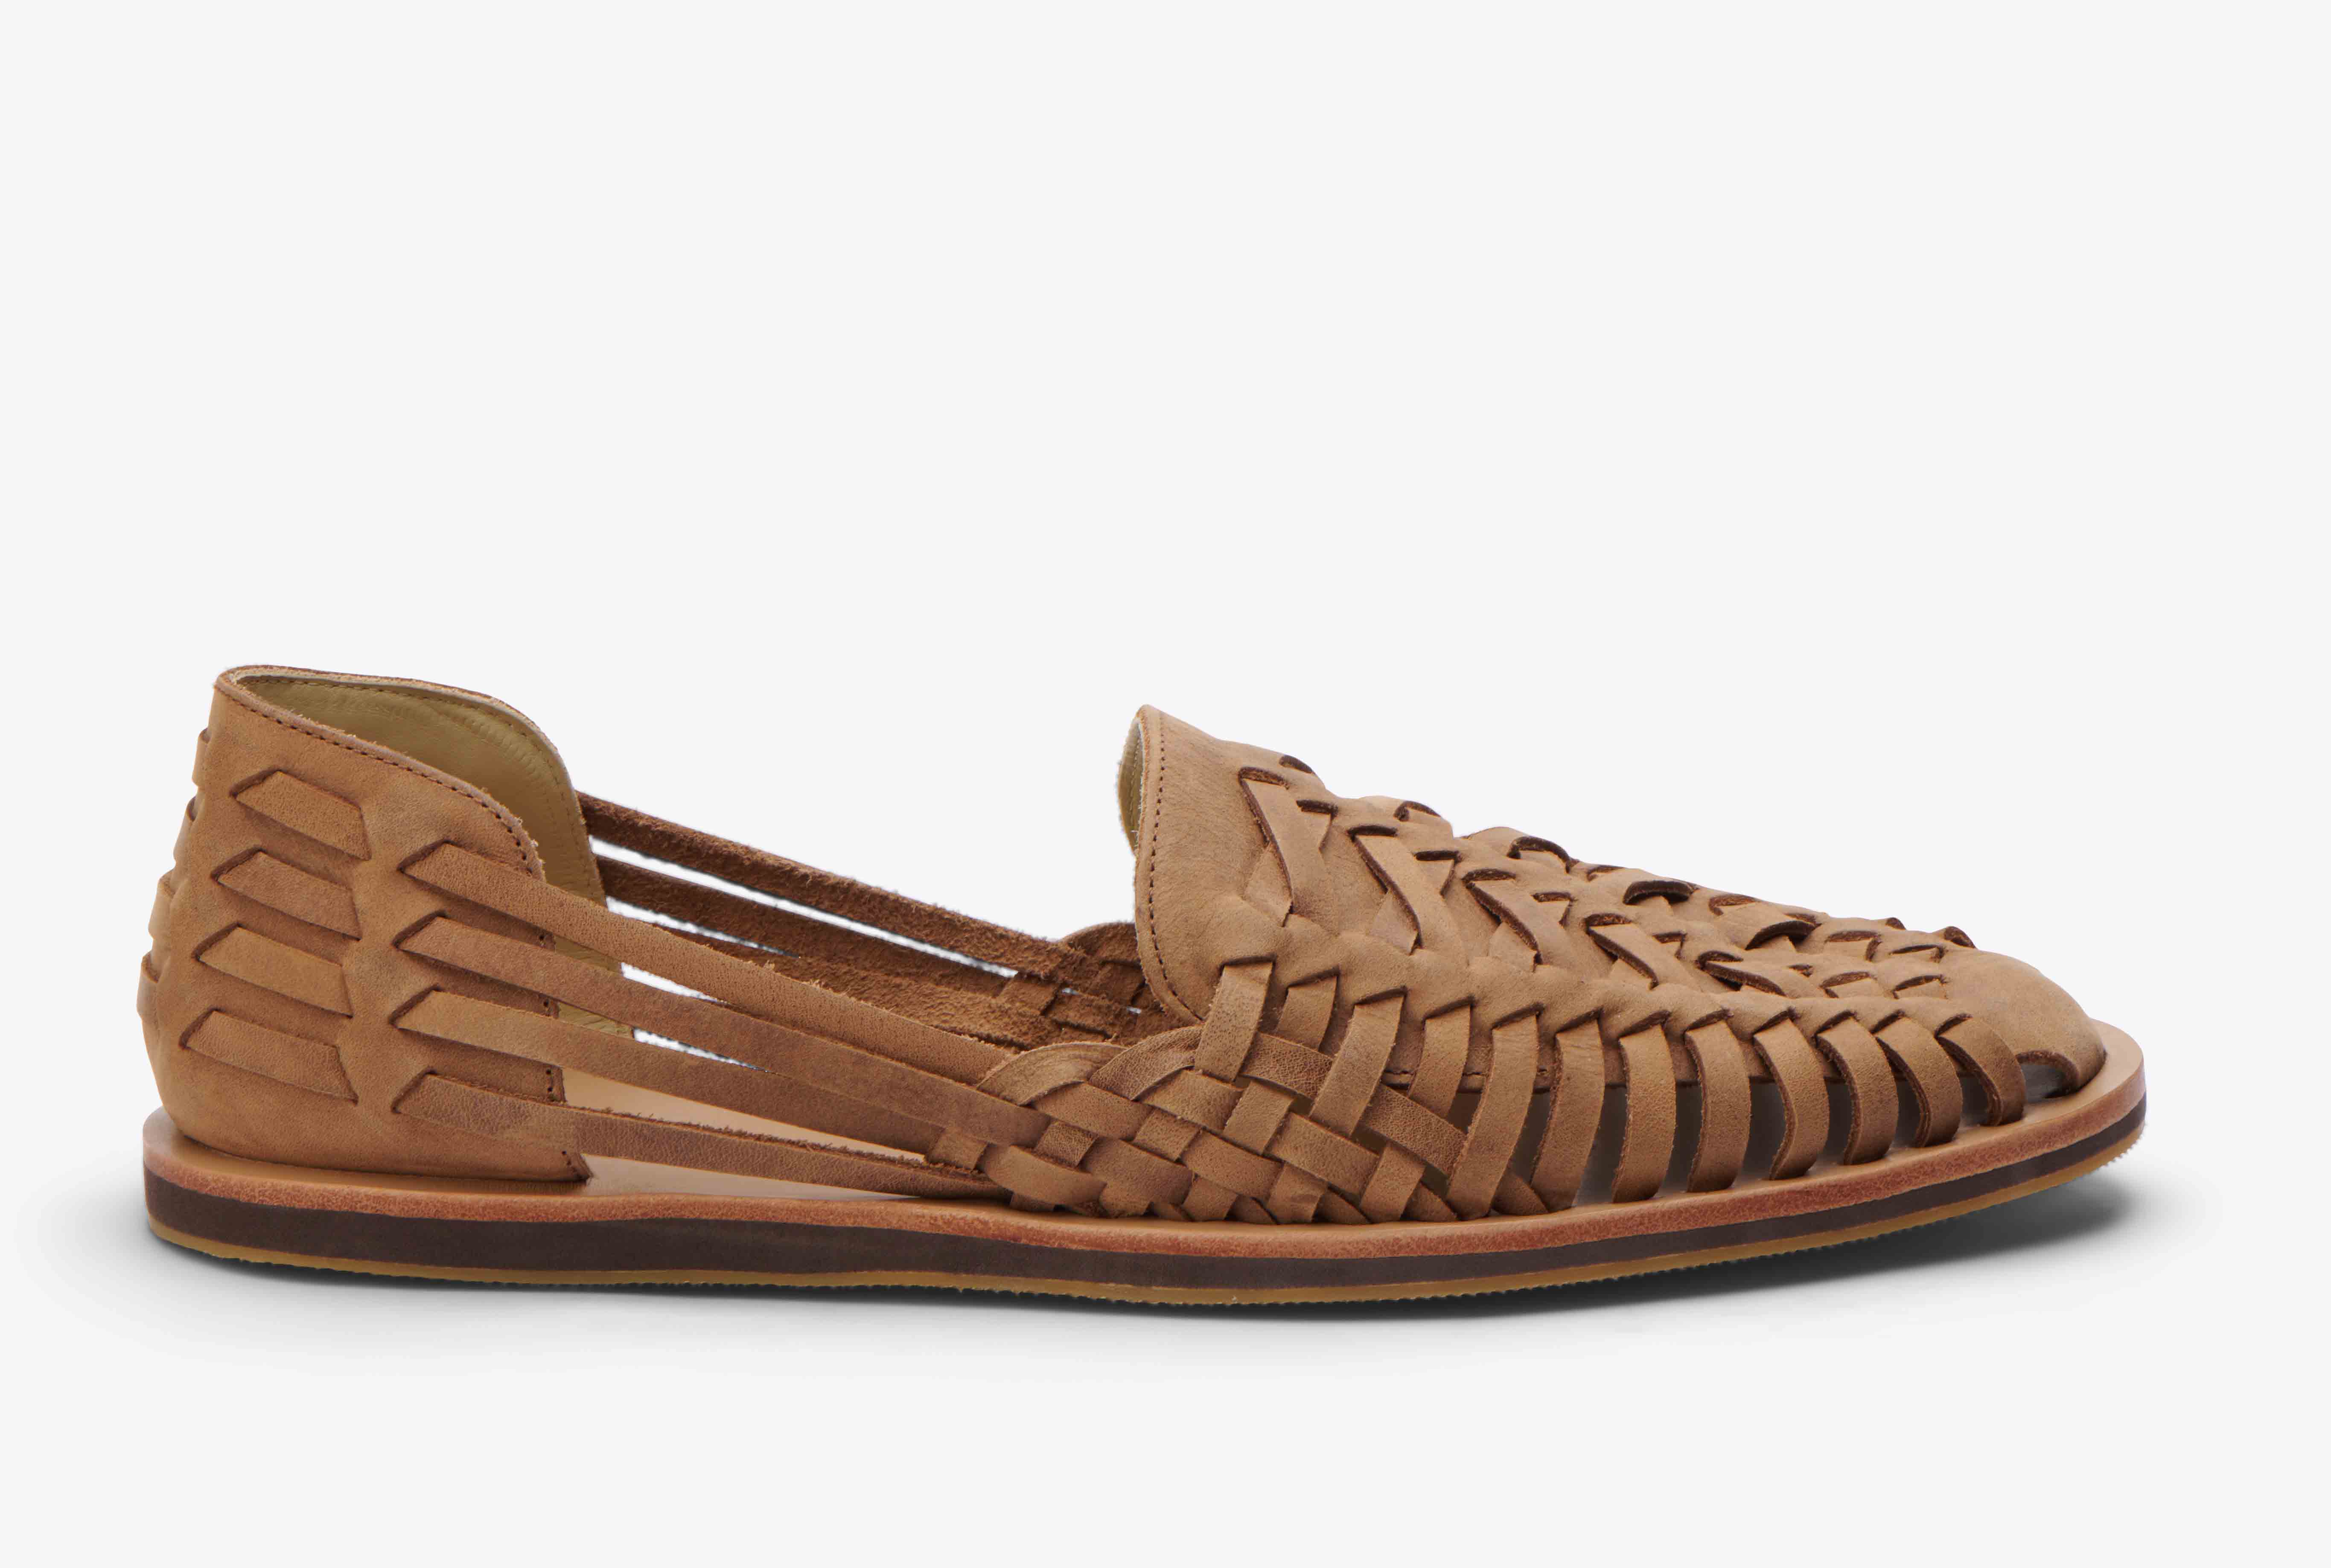 Nisolo Men's Huarache Sandal Tobacco - Every Nisolo product is built on the foundation of comfort, function, and design. 